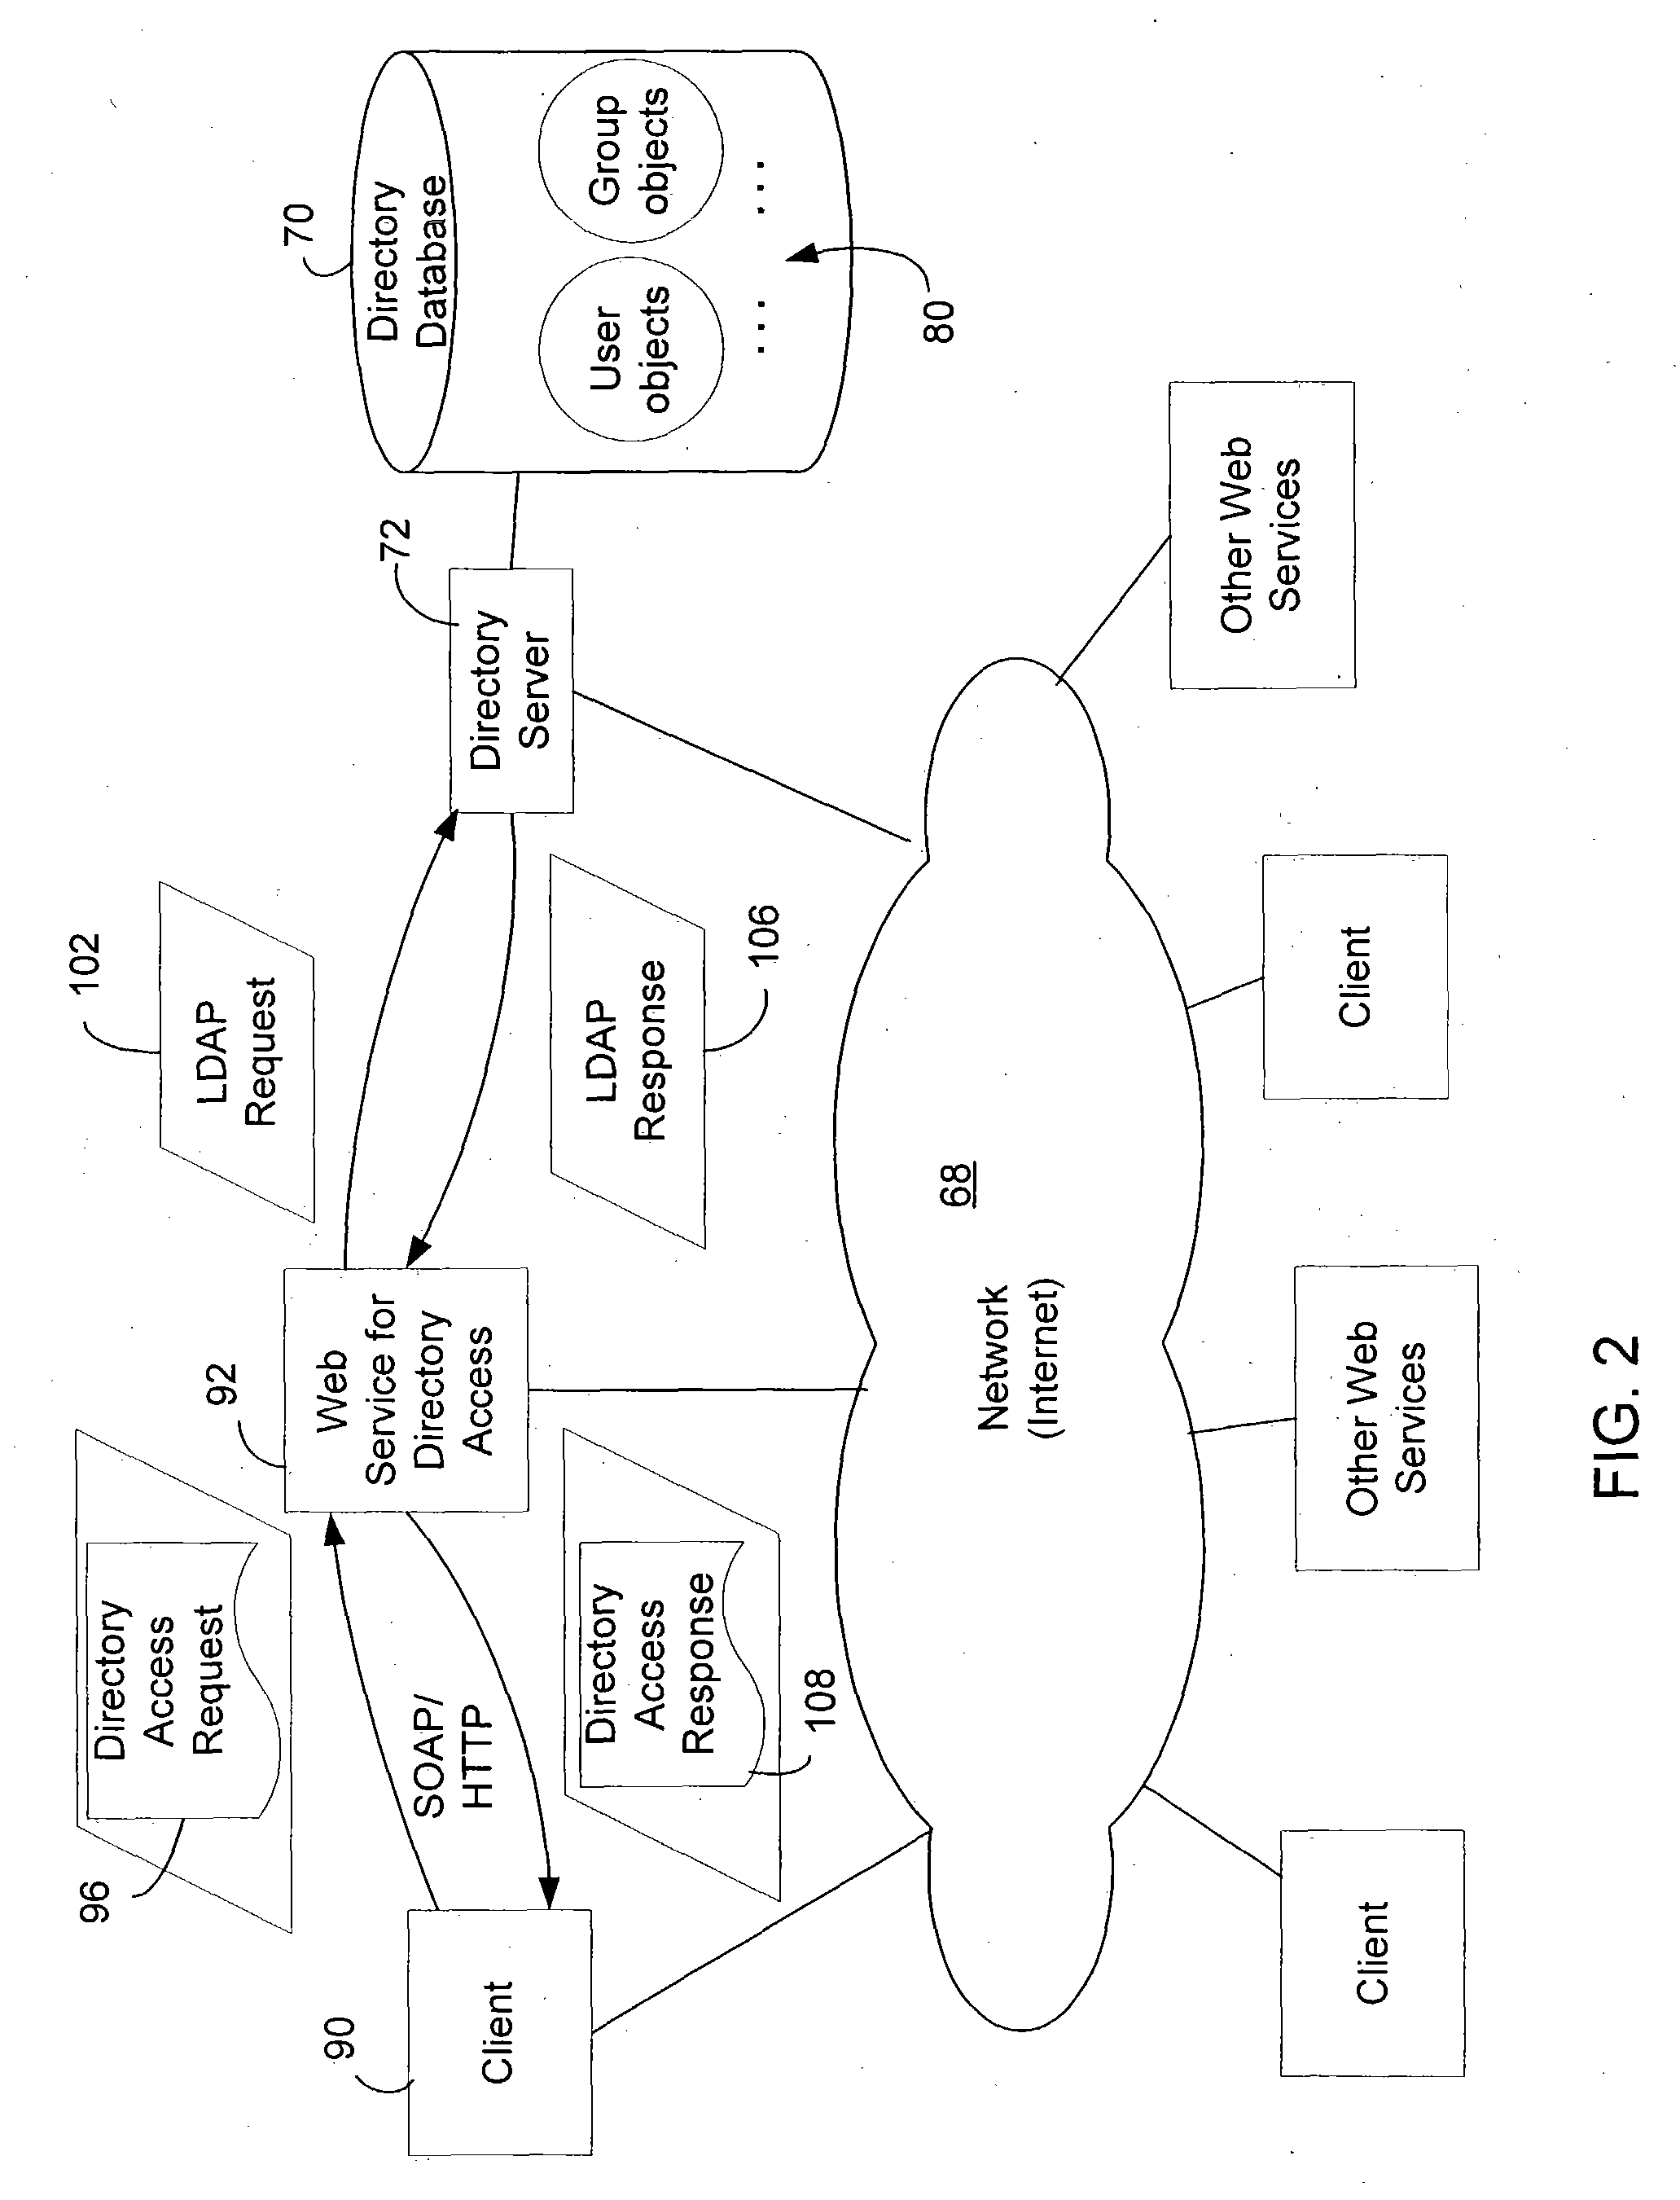 Method and system for accessing database objects in polyarchical relationships using data path expressions